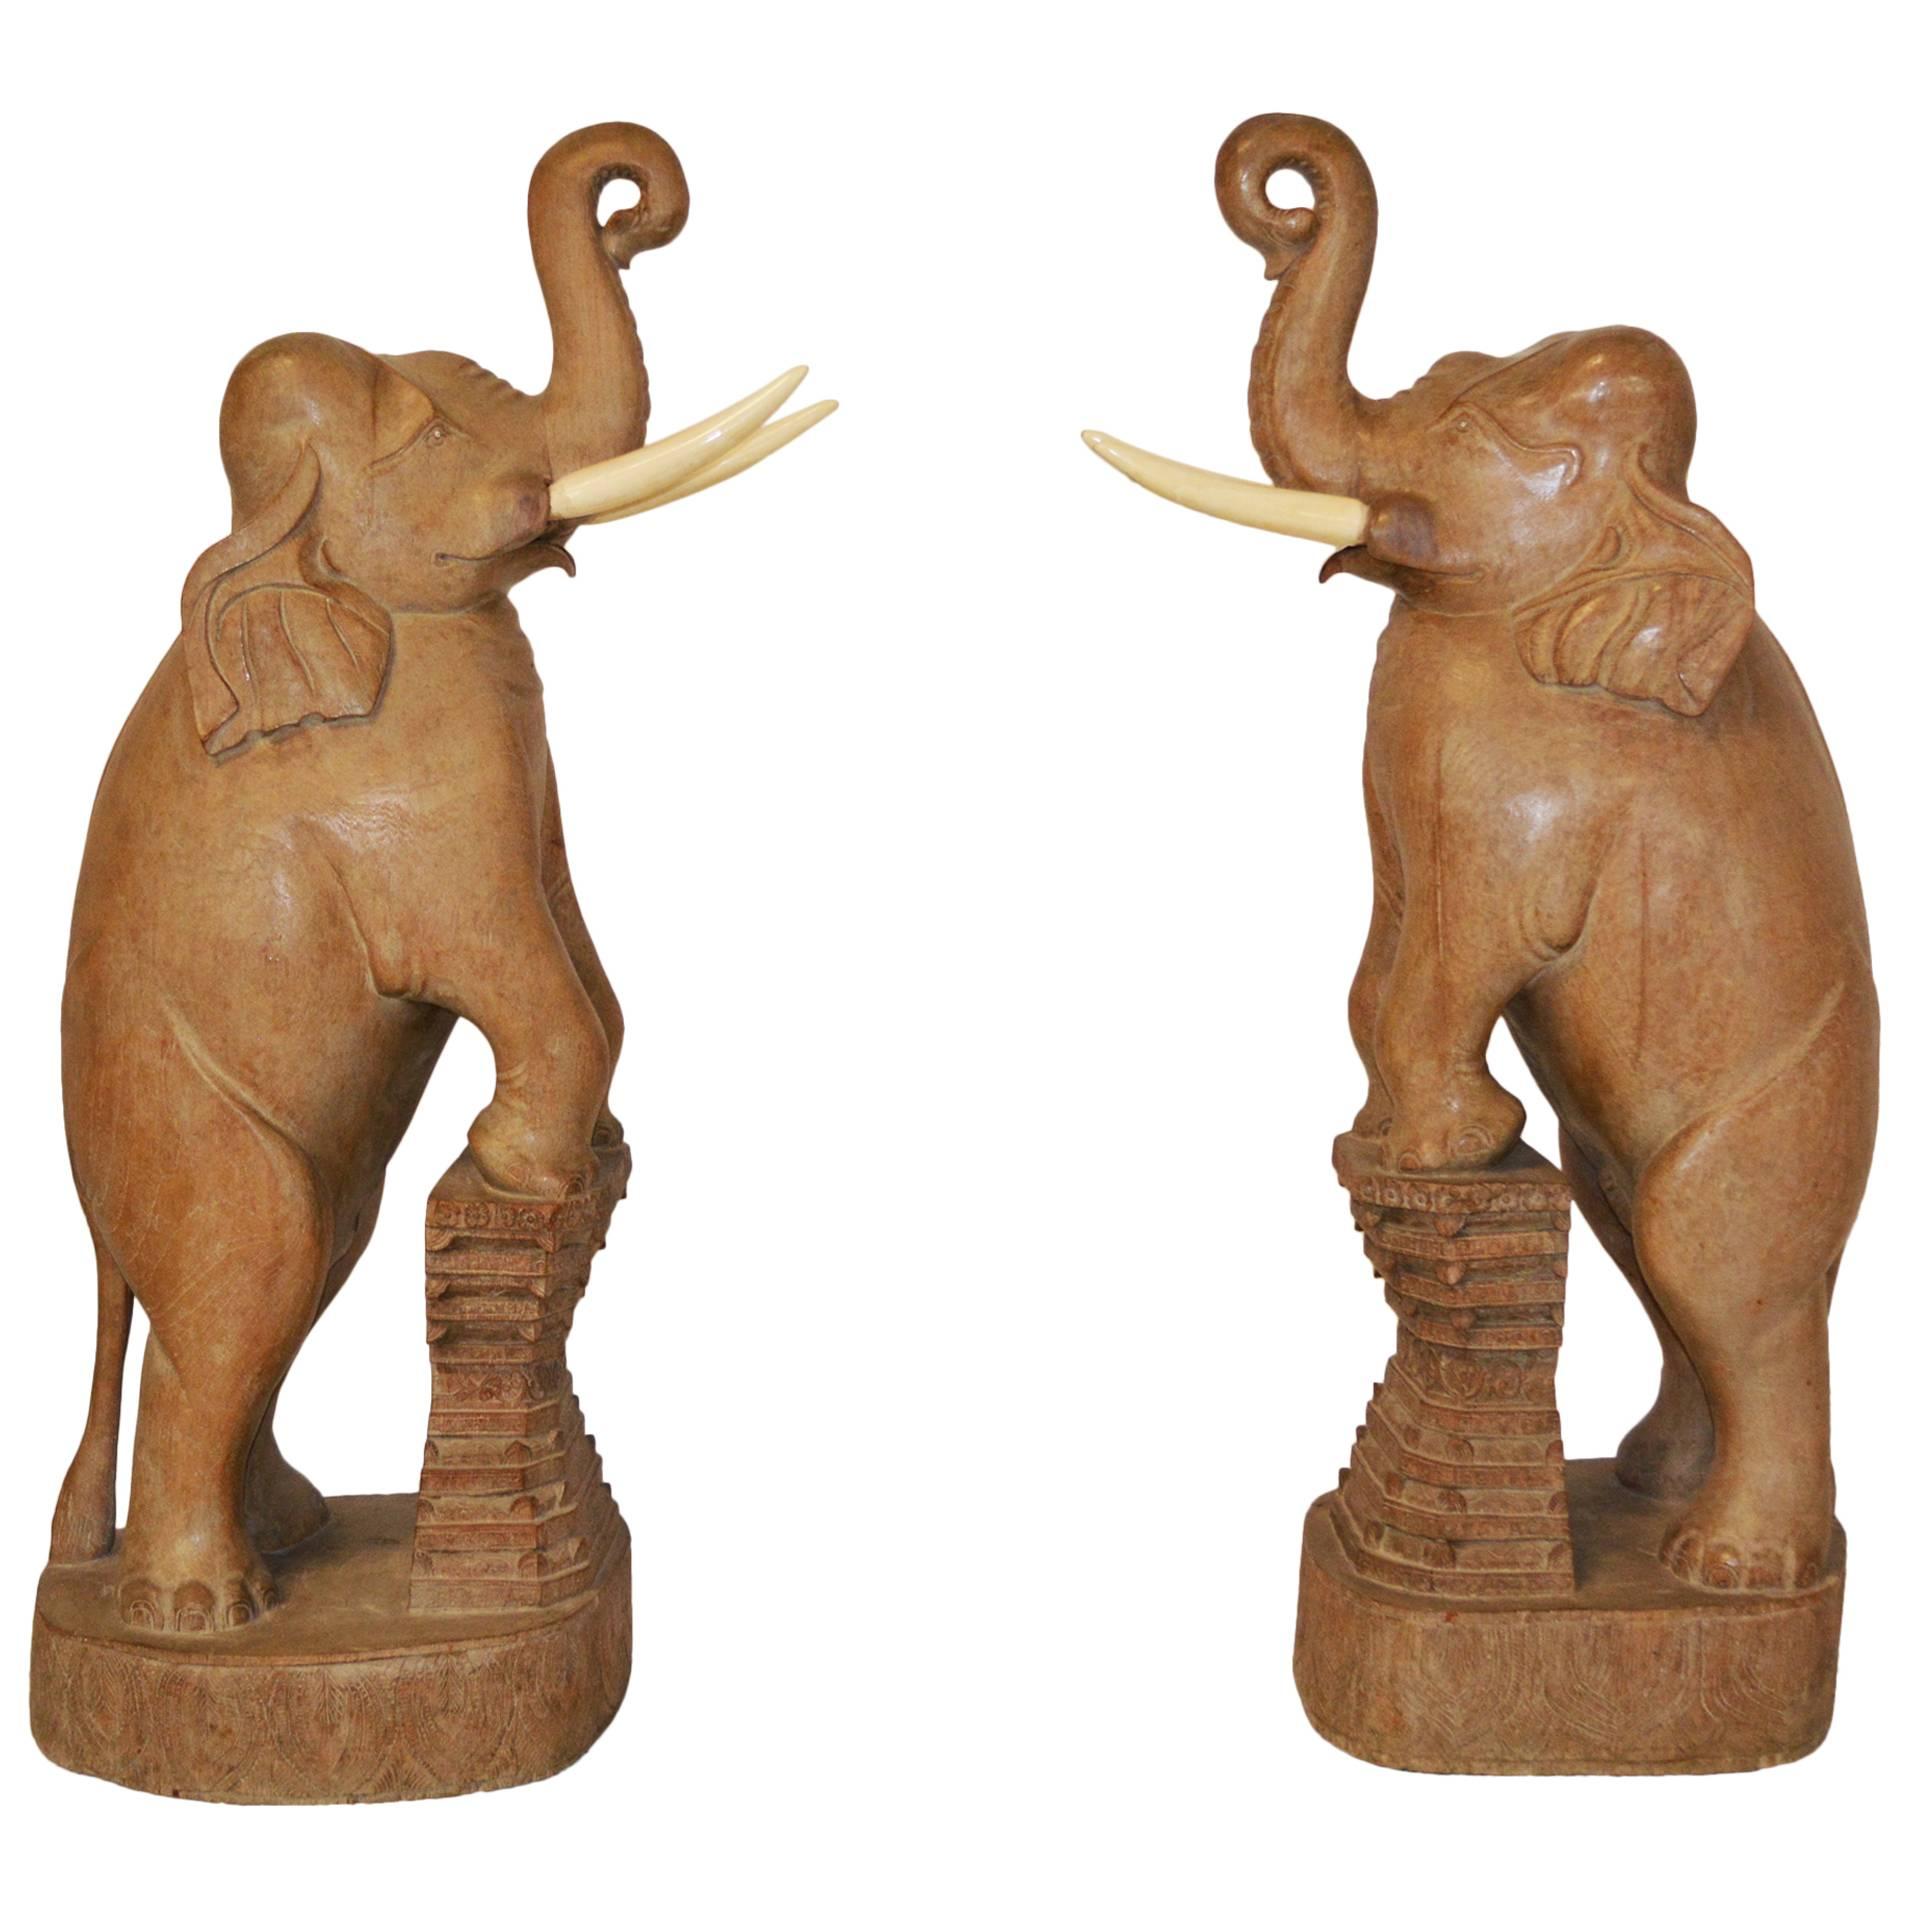 Pair of Carved Wood Elephants from "Auntie Mame" with Rosalind Russell